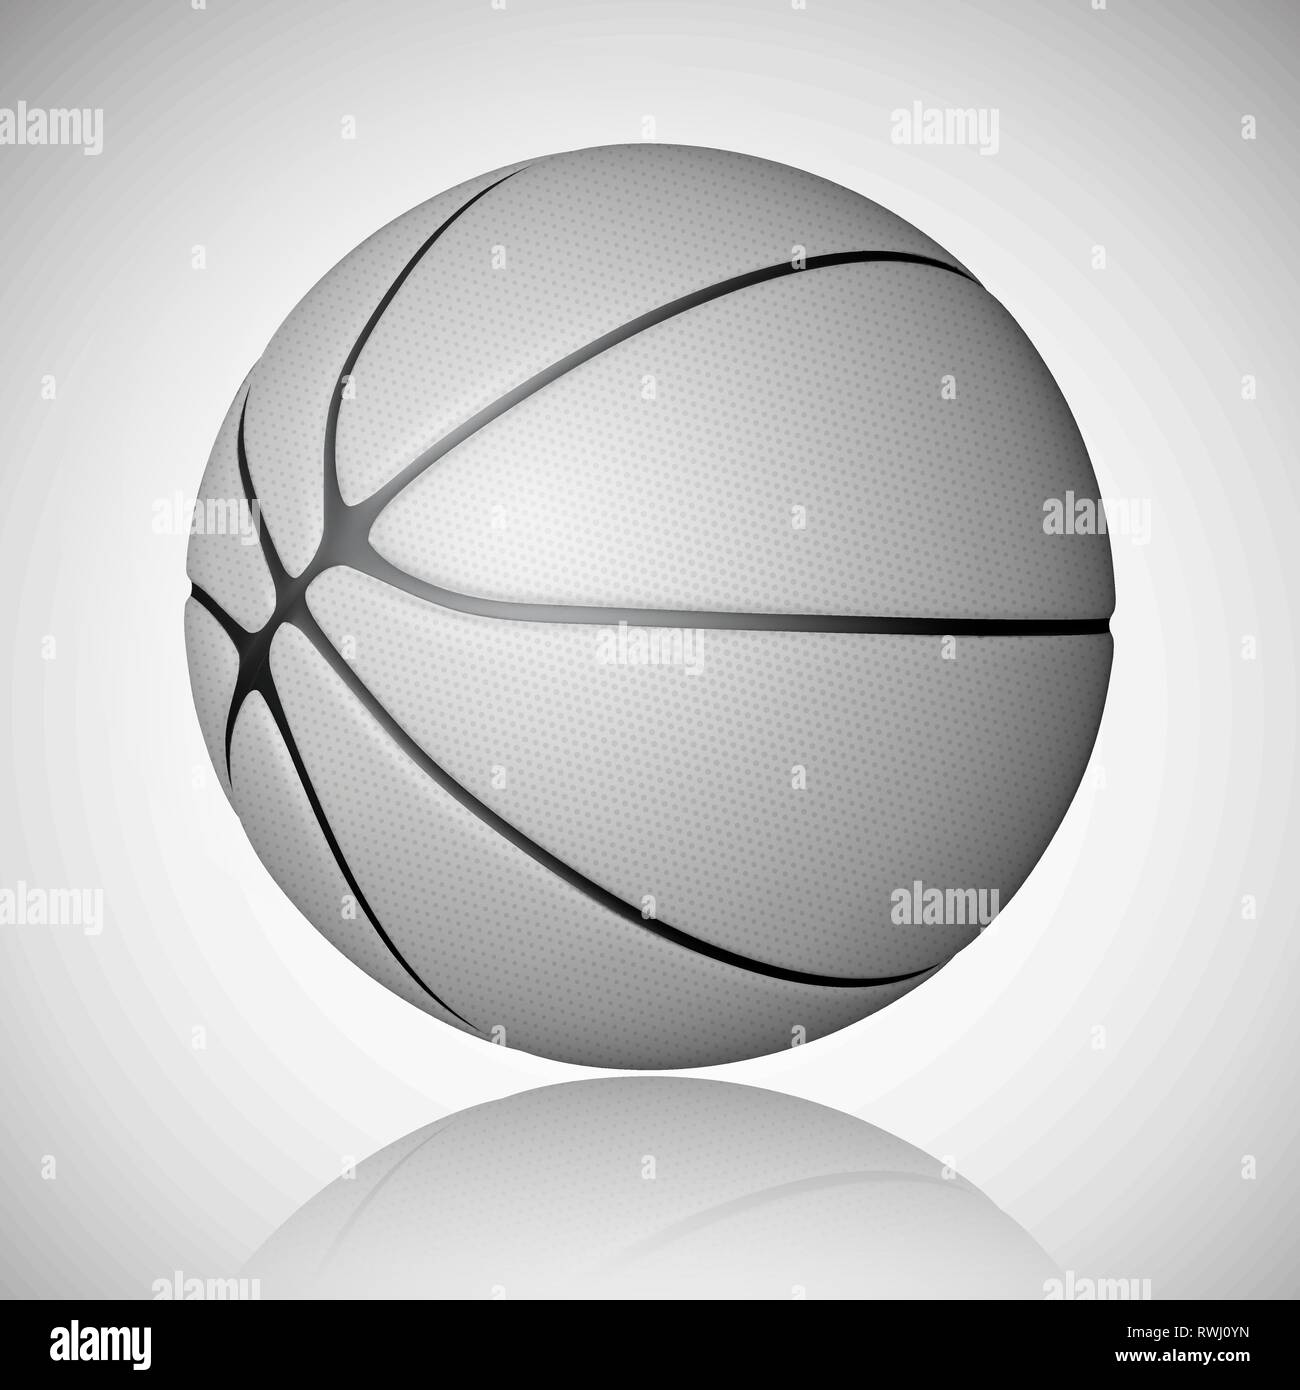 Basketball ball isolated on a white background. Realistic Vector Illustration. Stock Vector